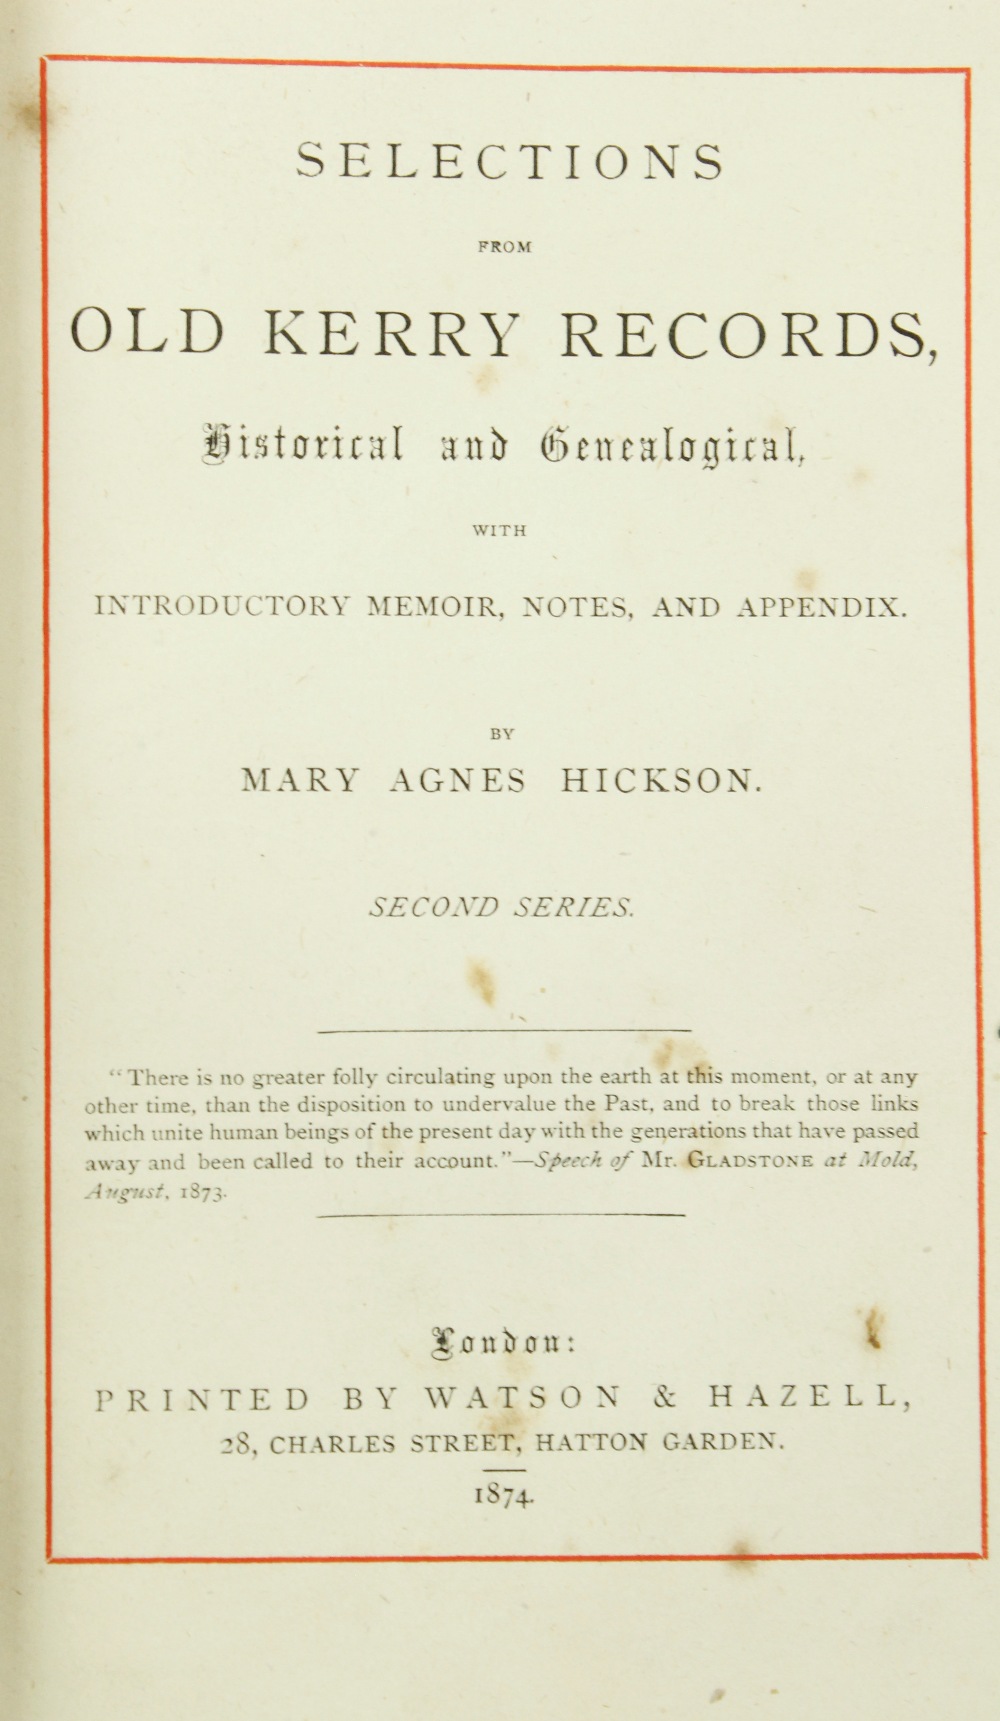 Hickson (Mary Agnes) Selections from Old Kerry Records, Historical and Genealogical, Second - Image 2 of 2